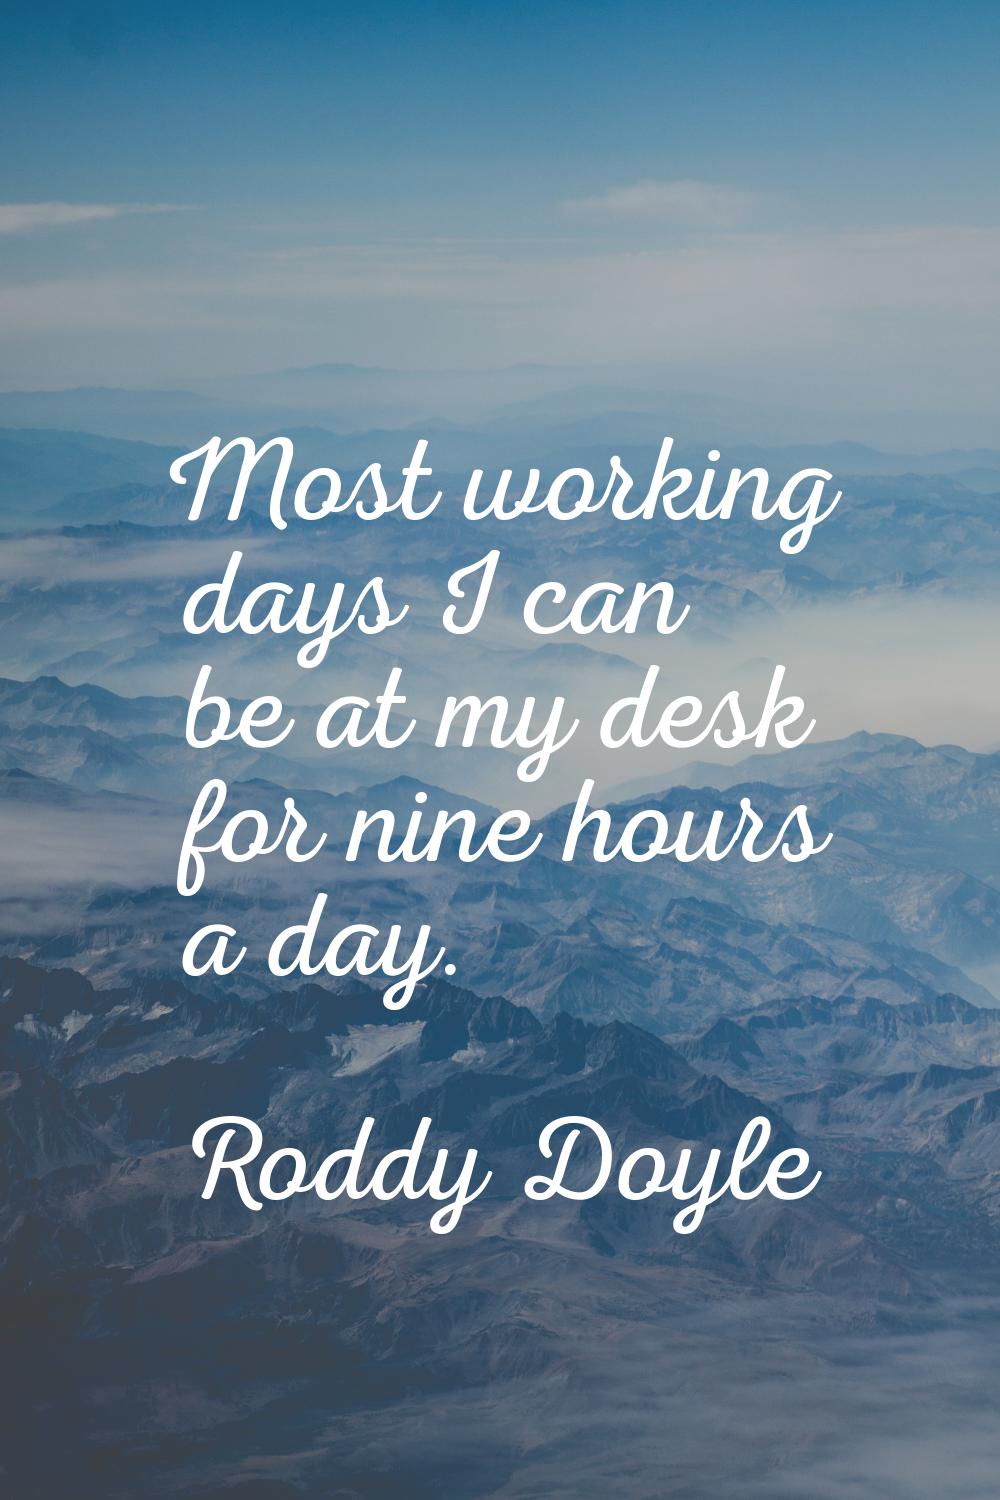 Most working days I can be at my desk for nine hours a day.